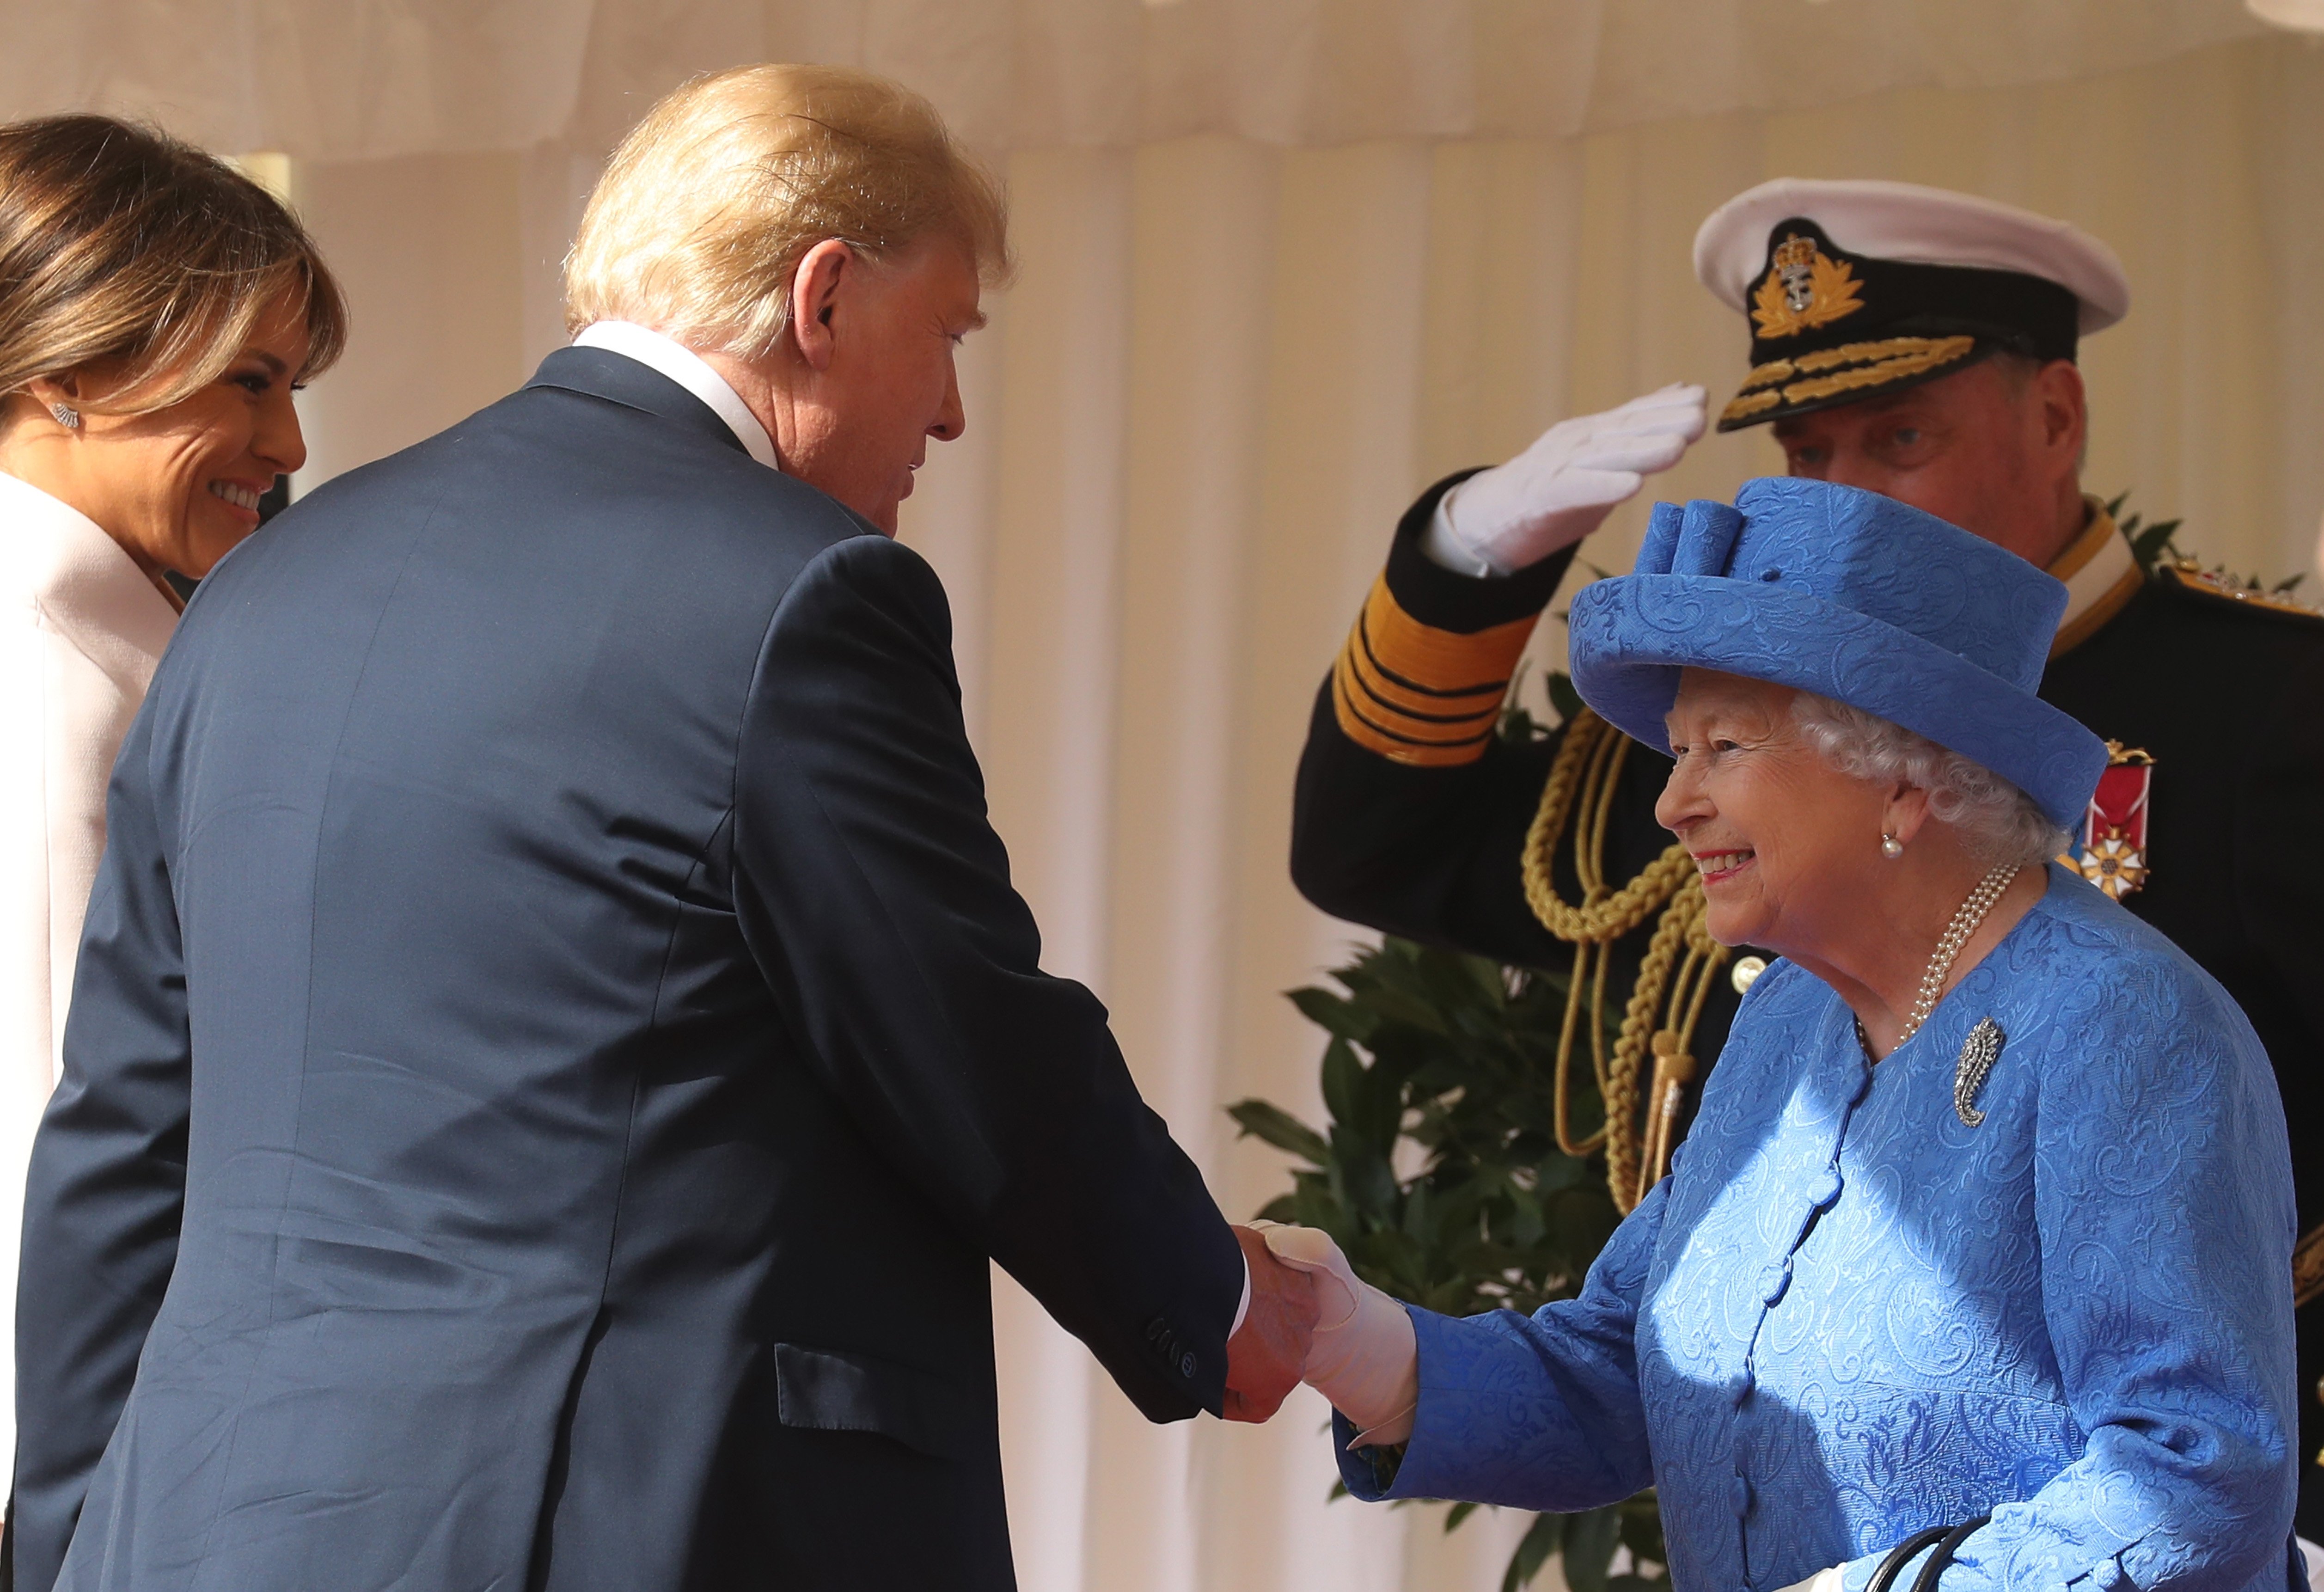 President Donald Trump and First Lady Melania Trump meeting the Queen in July 2018 | Photo: Getty Images